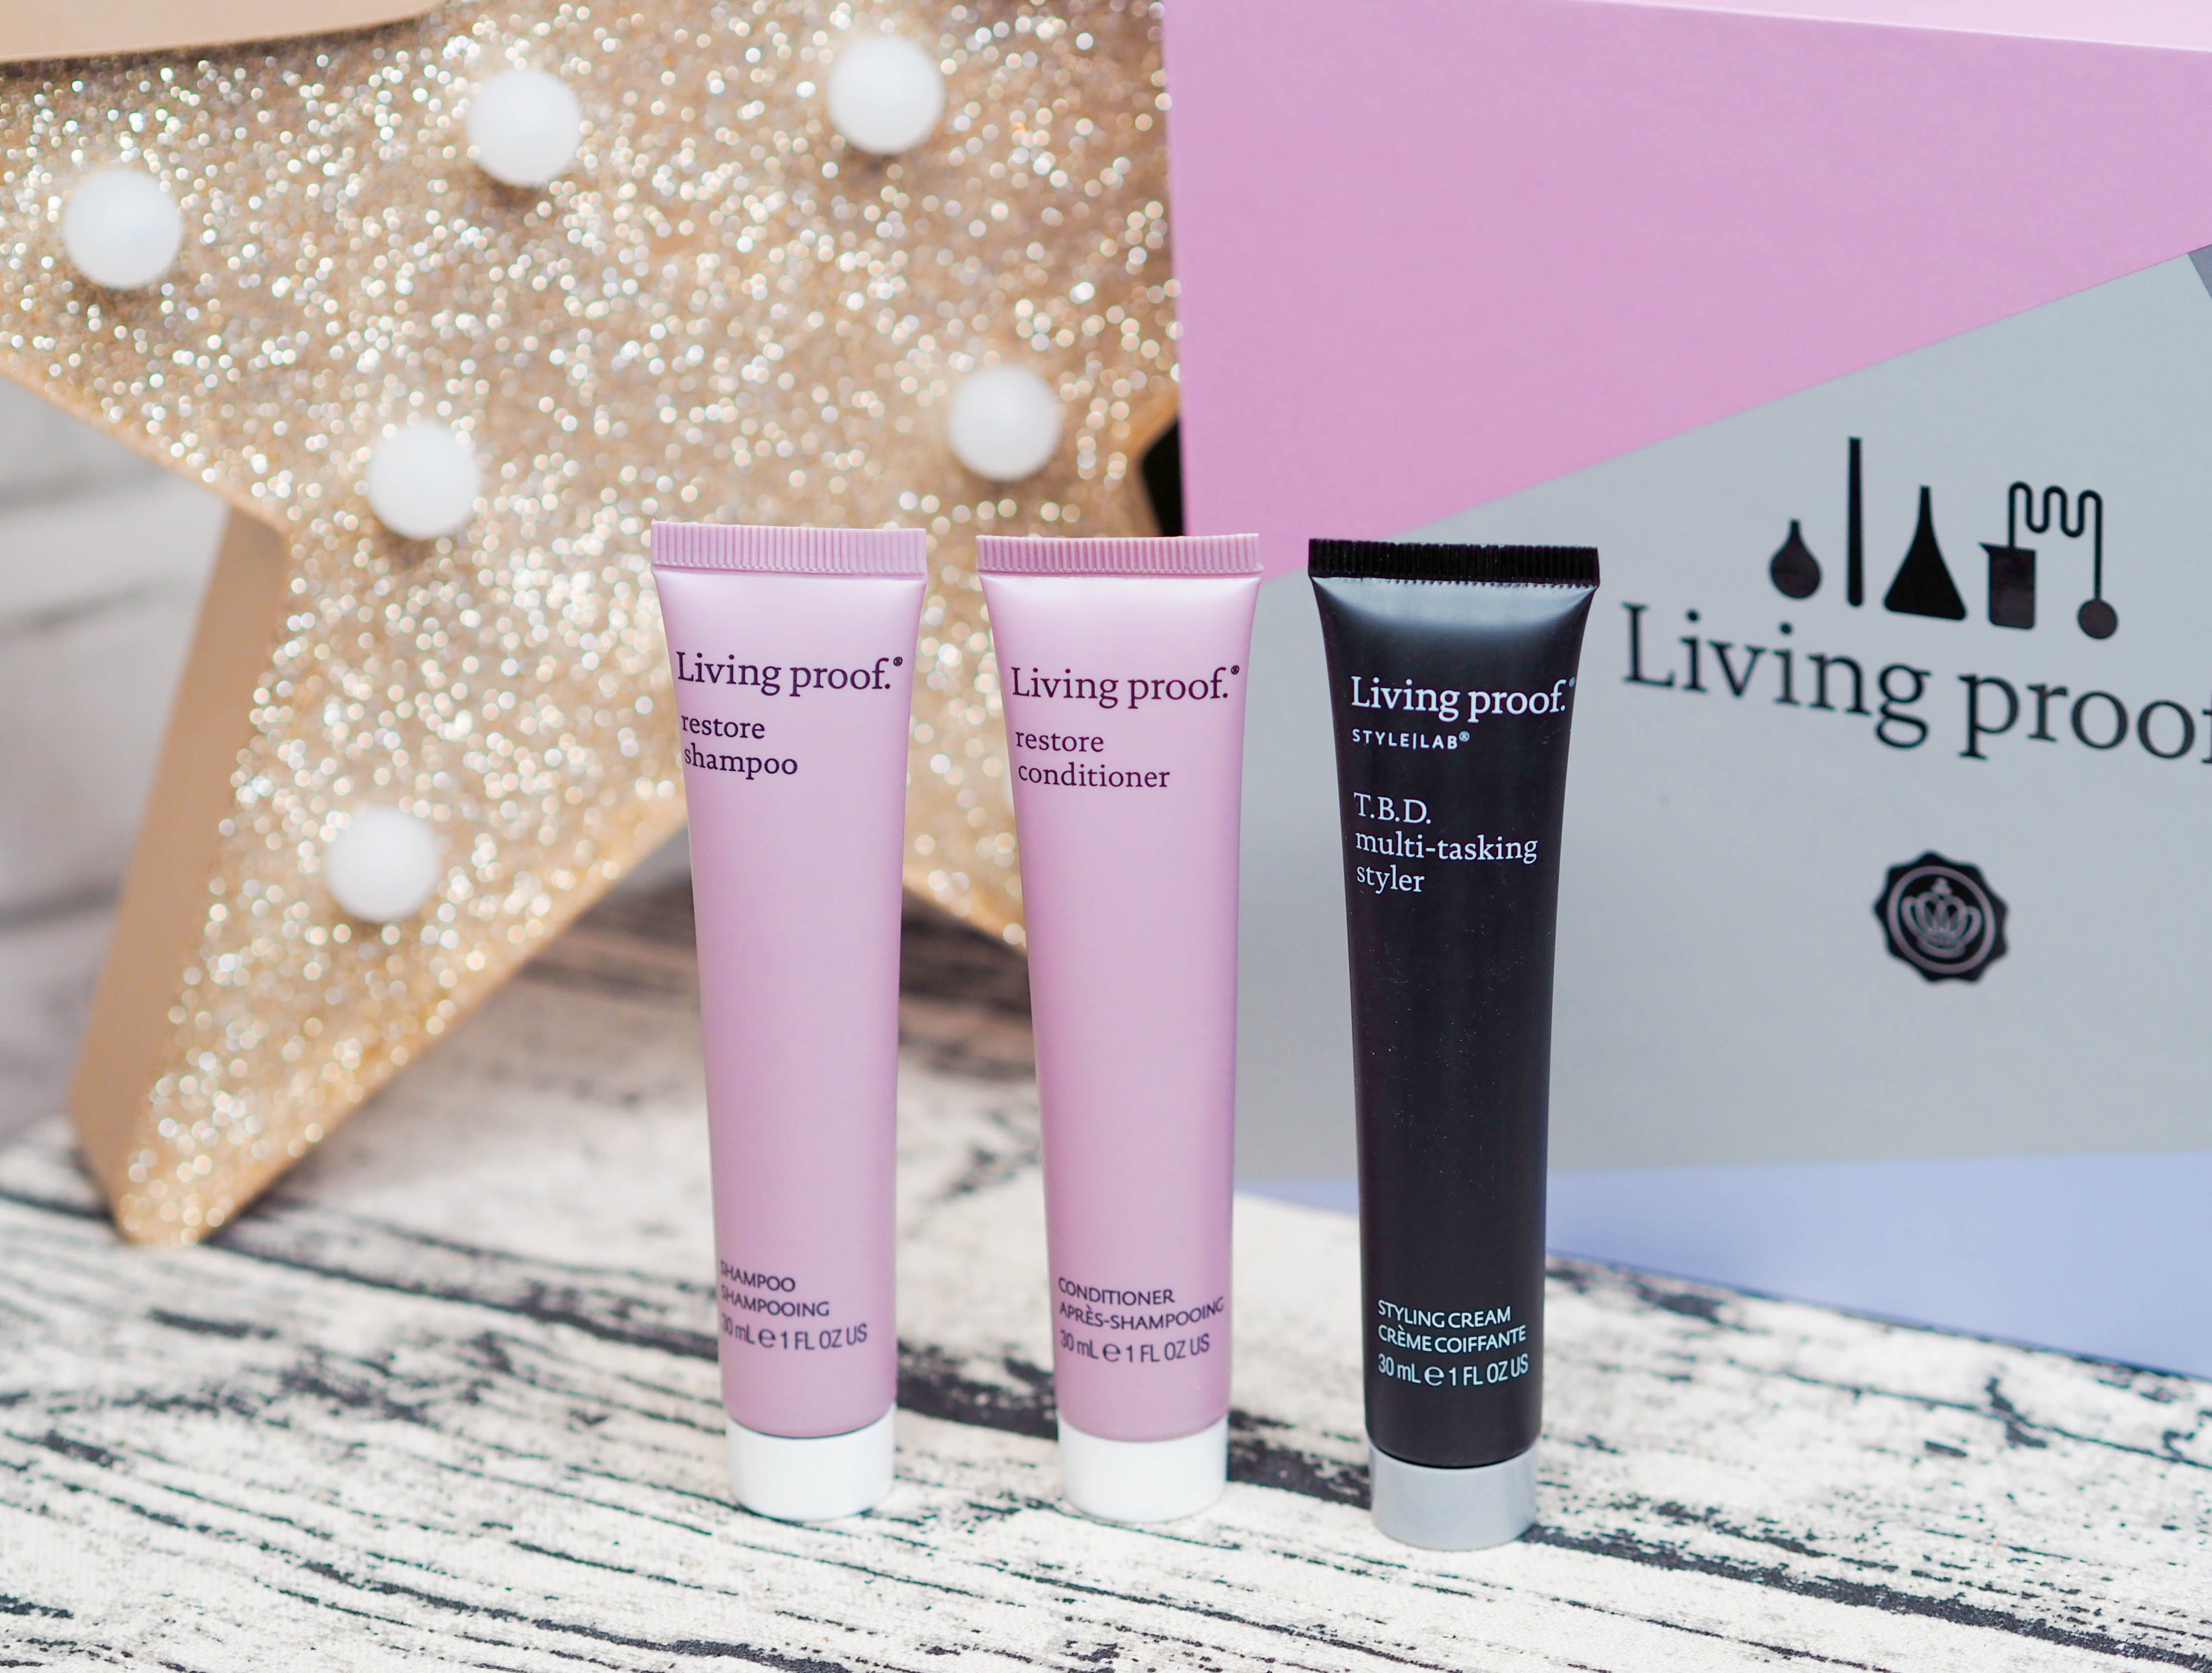 Glossybox x Living Proof Limited Edition Box 